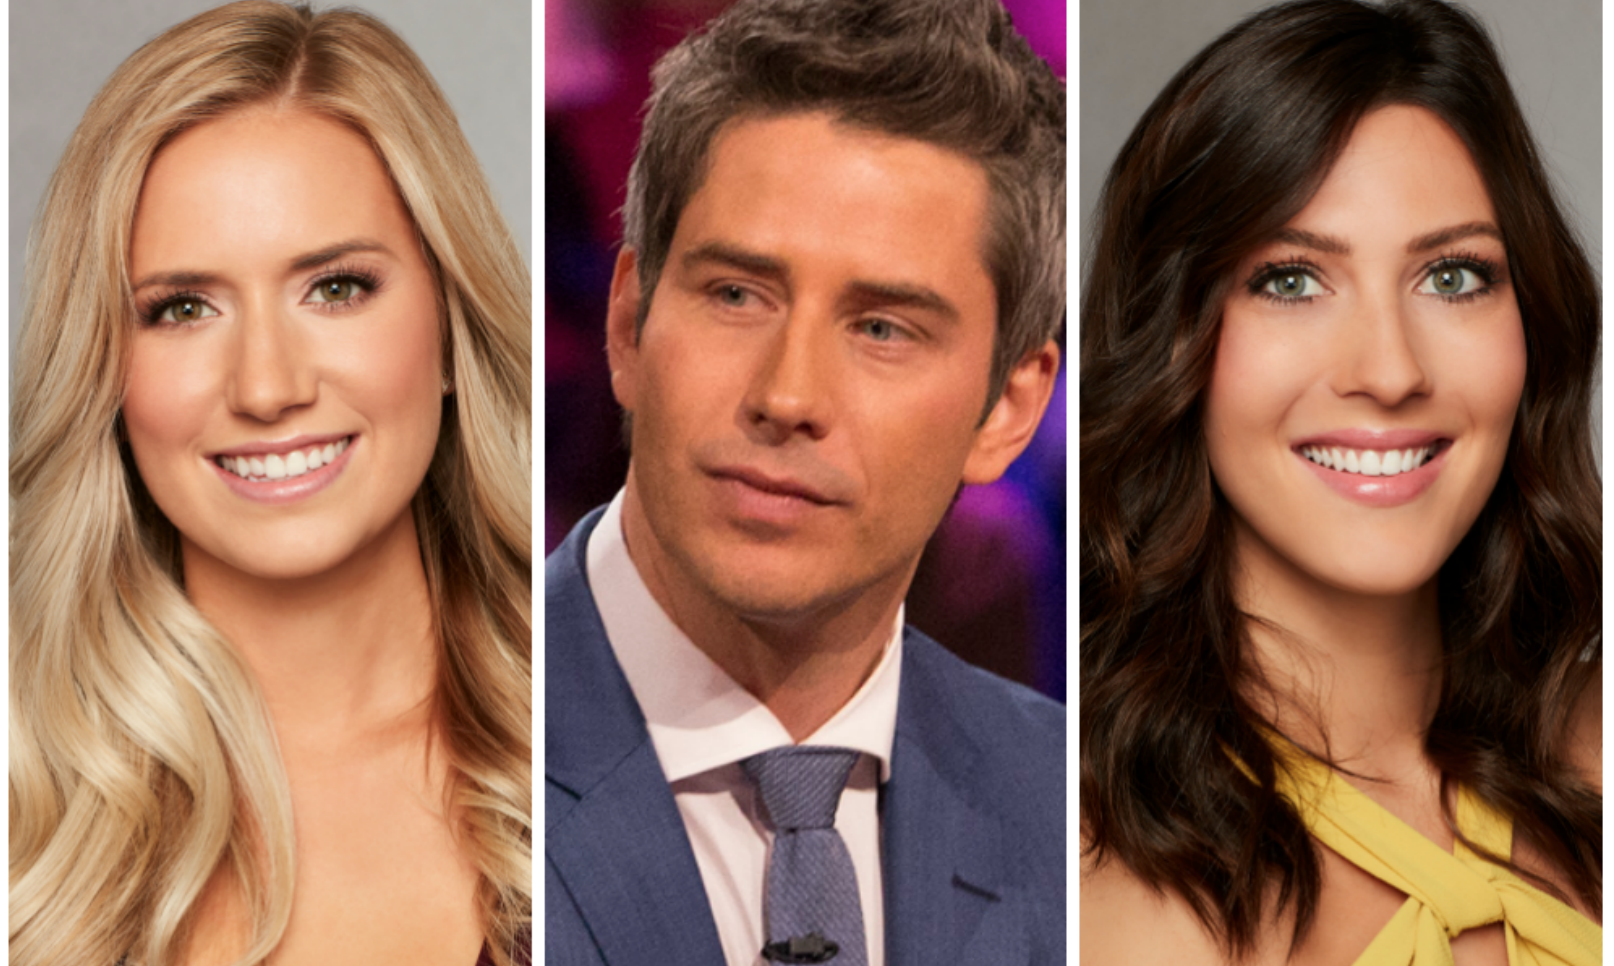 What Happened on The Bachelor Finale? — A Complete Timeline!